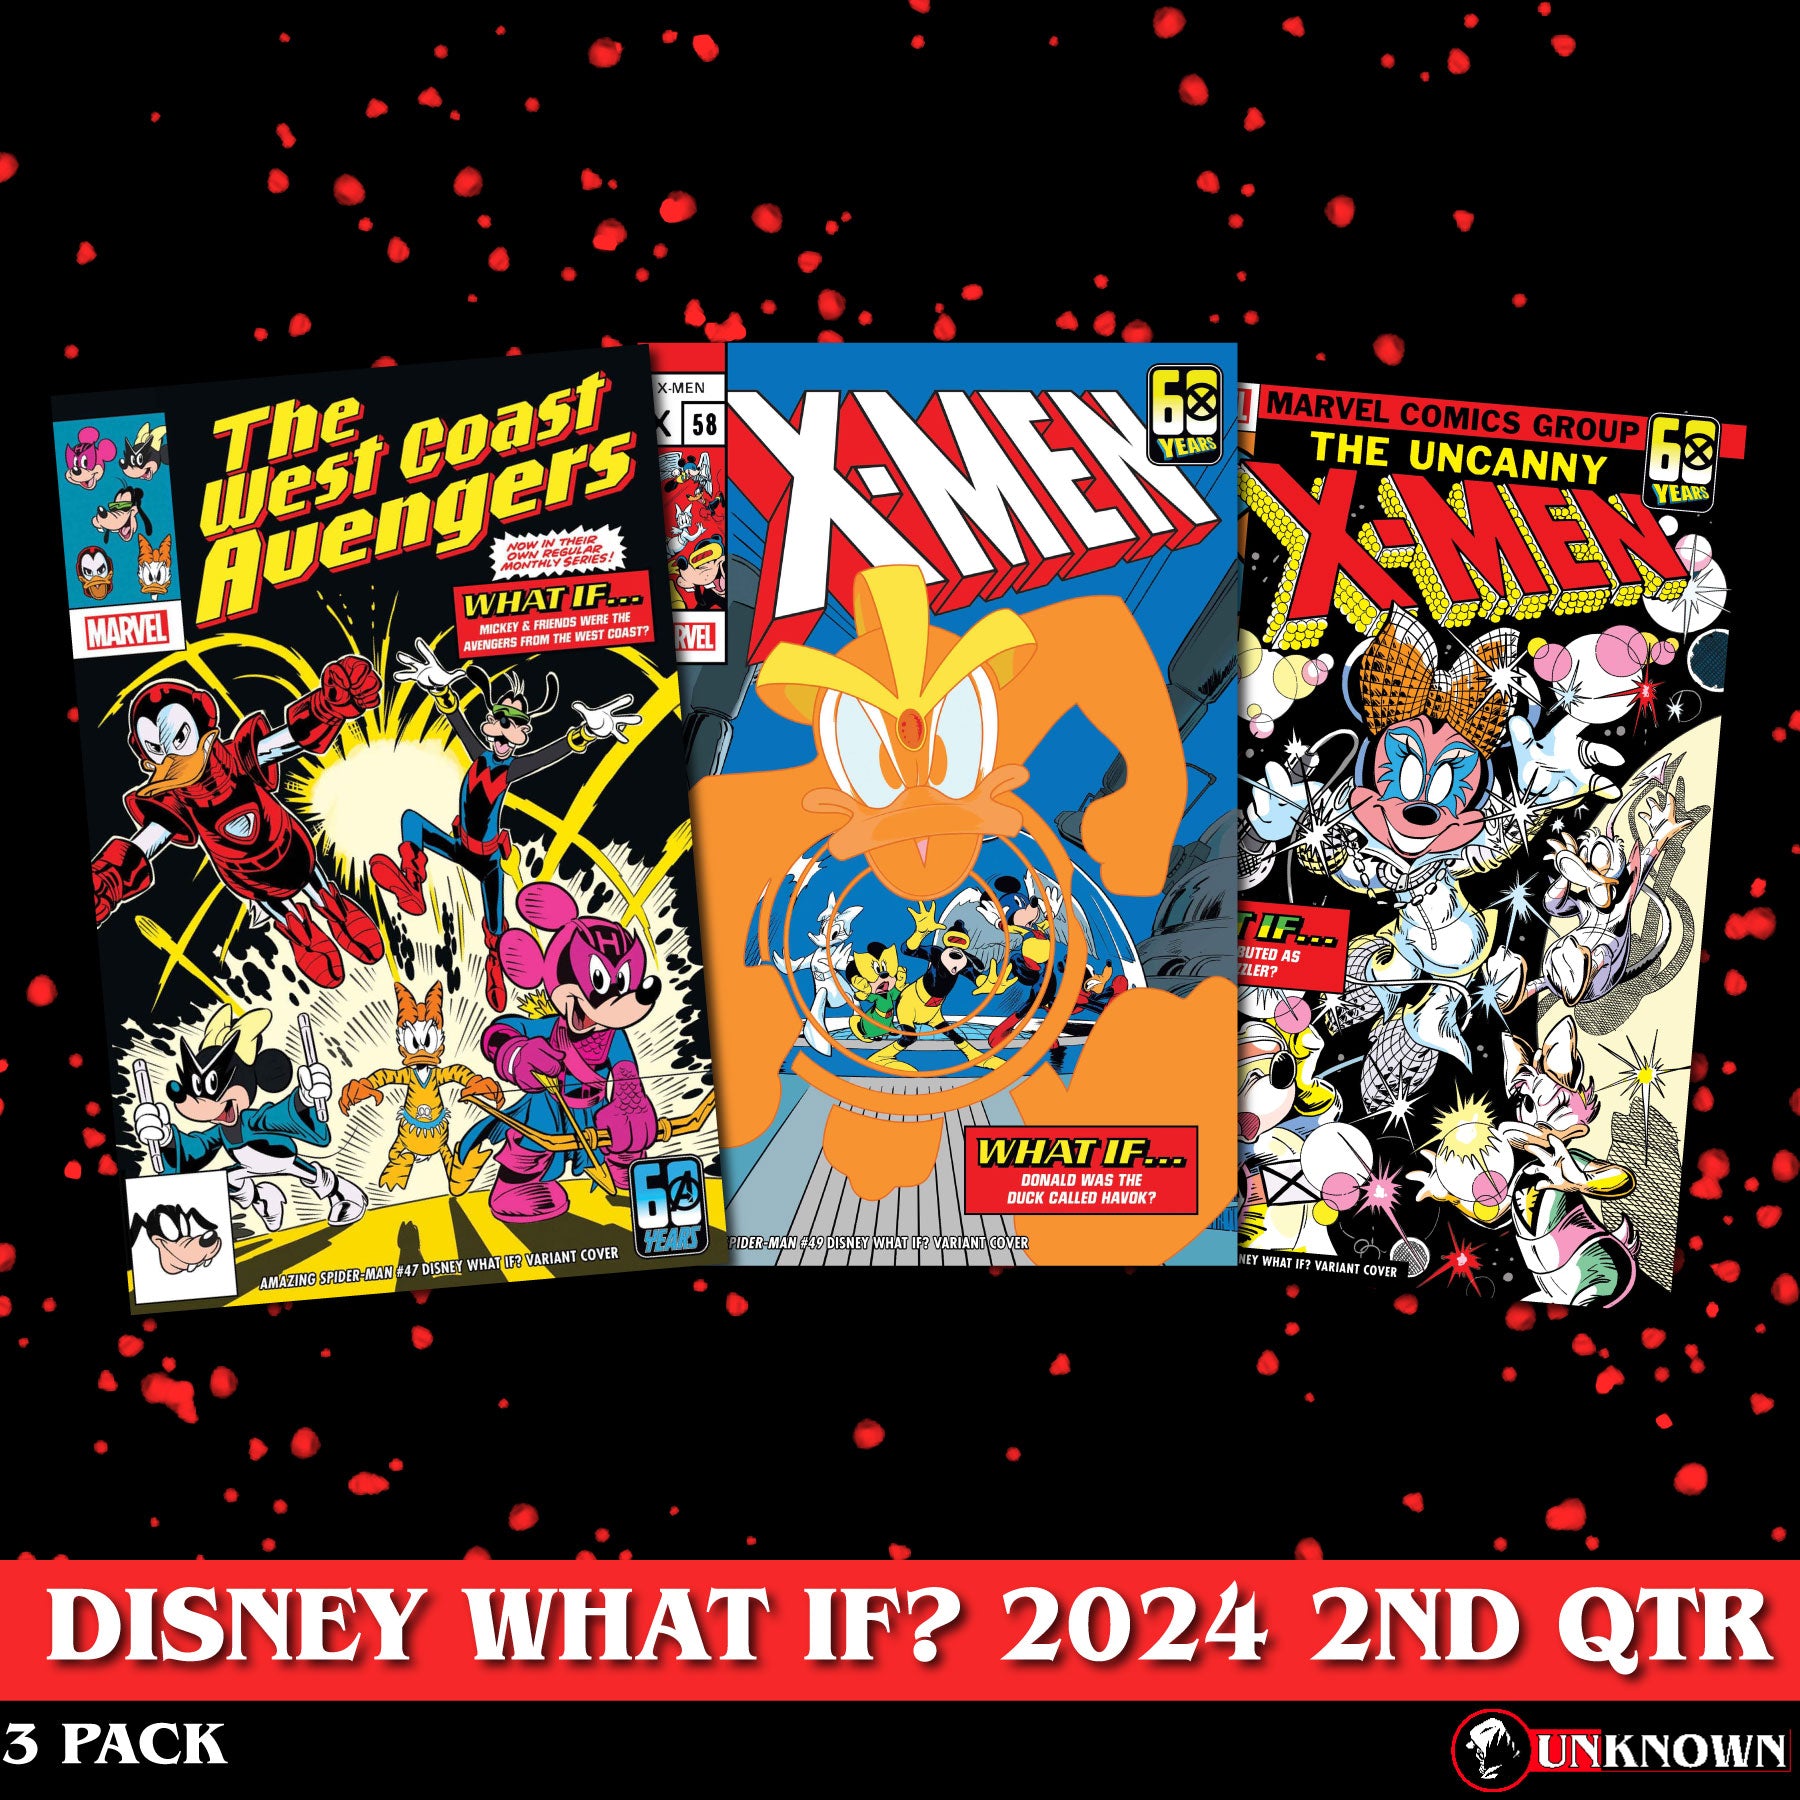 Three New Disney What If? Covers That Will Twist Your Favorite Marvel Moments!